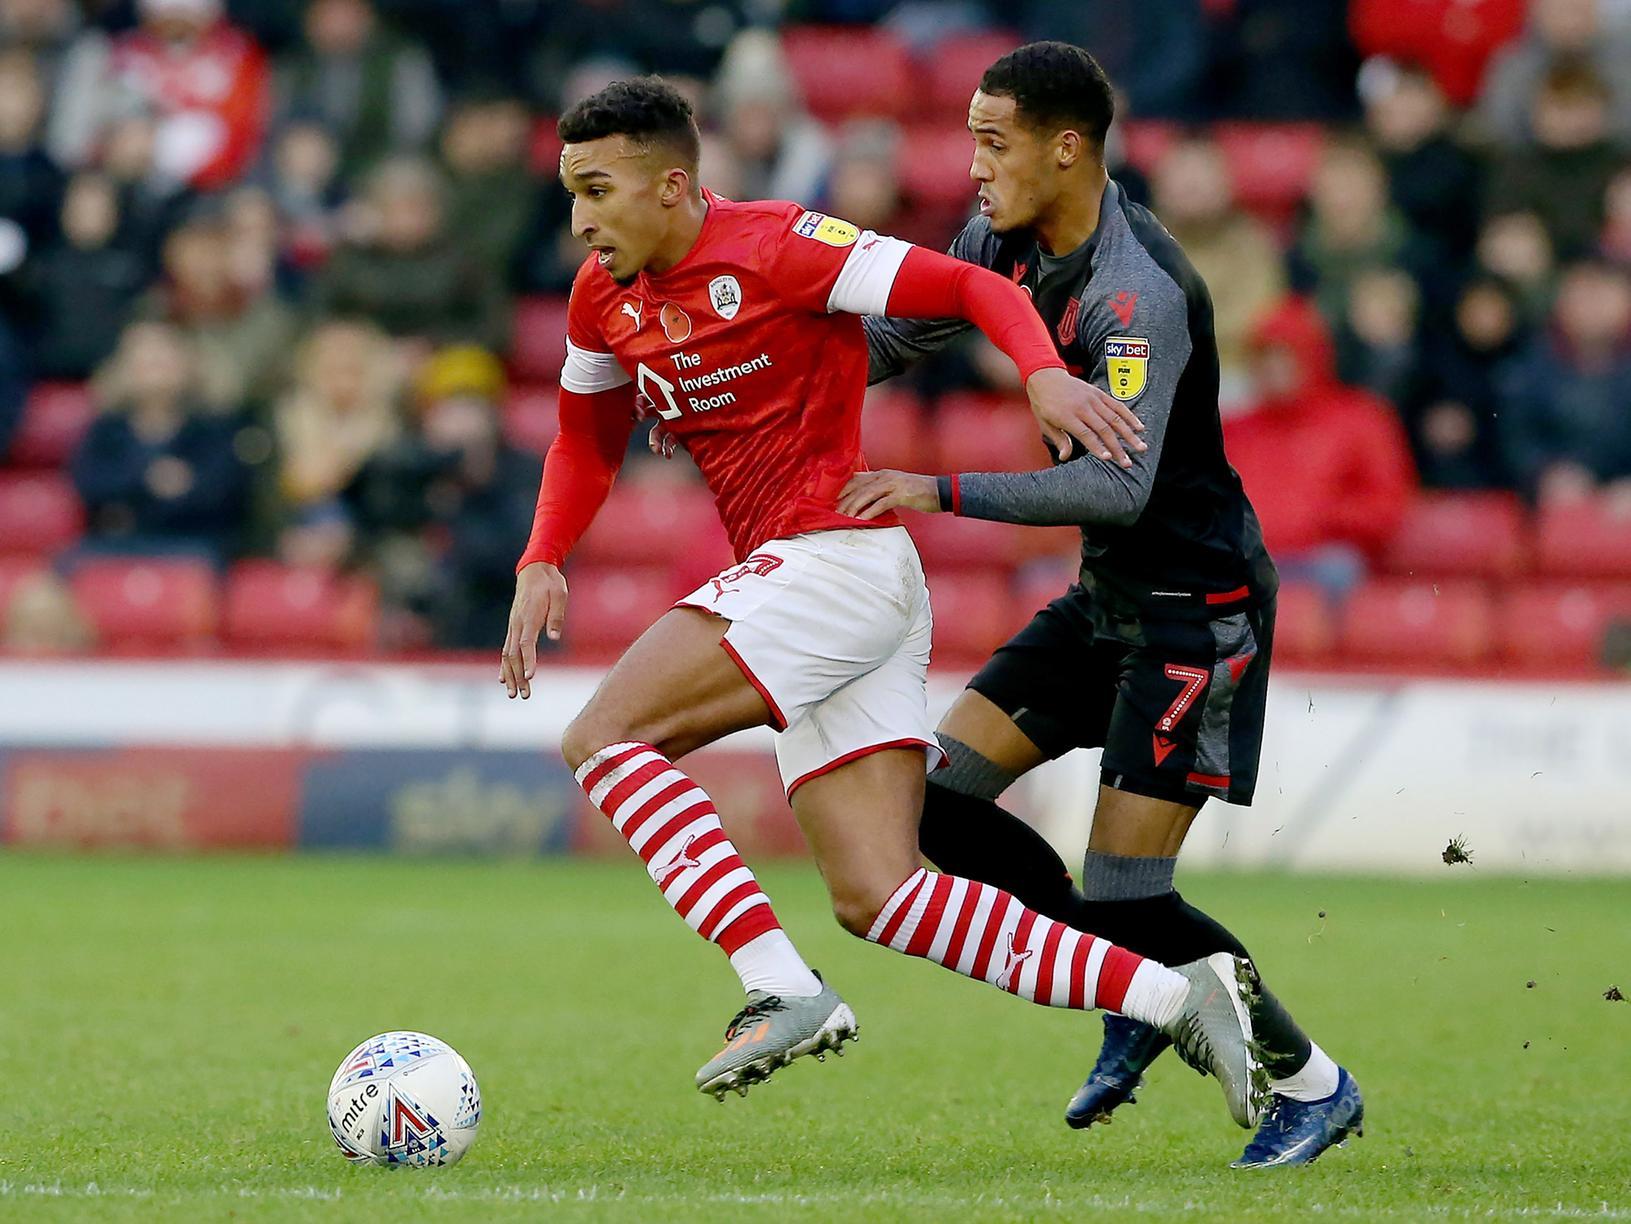 Brentford, who look to be intent in bringing in another forward in January, have now been linked with a move for Barnsley ace Jacob Brown. He's racked up an impressive eight assists for the Tykes this season. (Football League World)